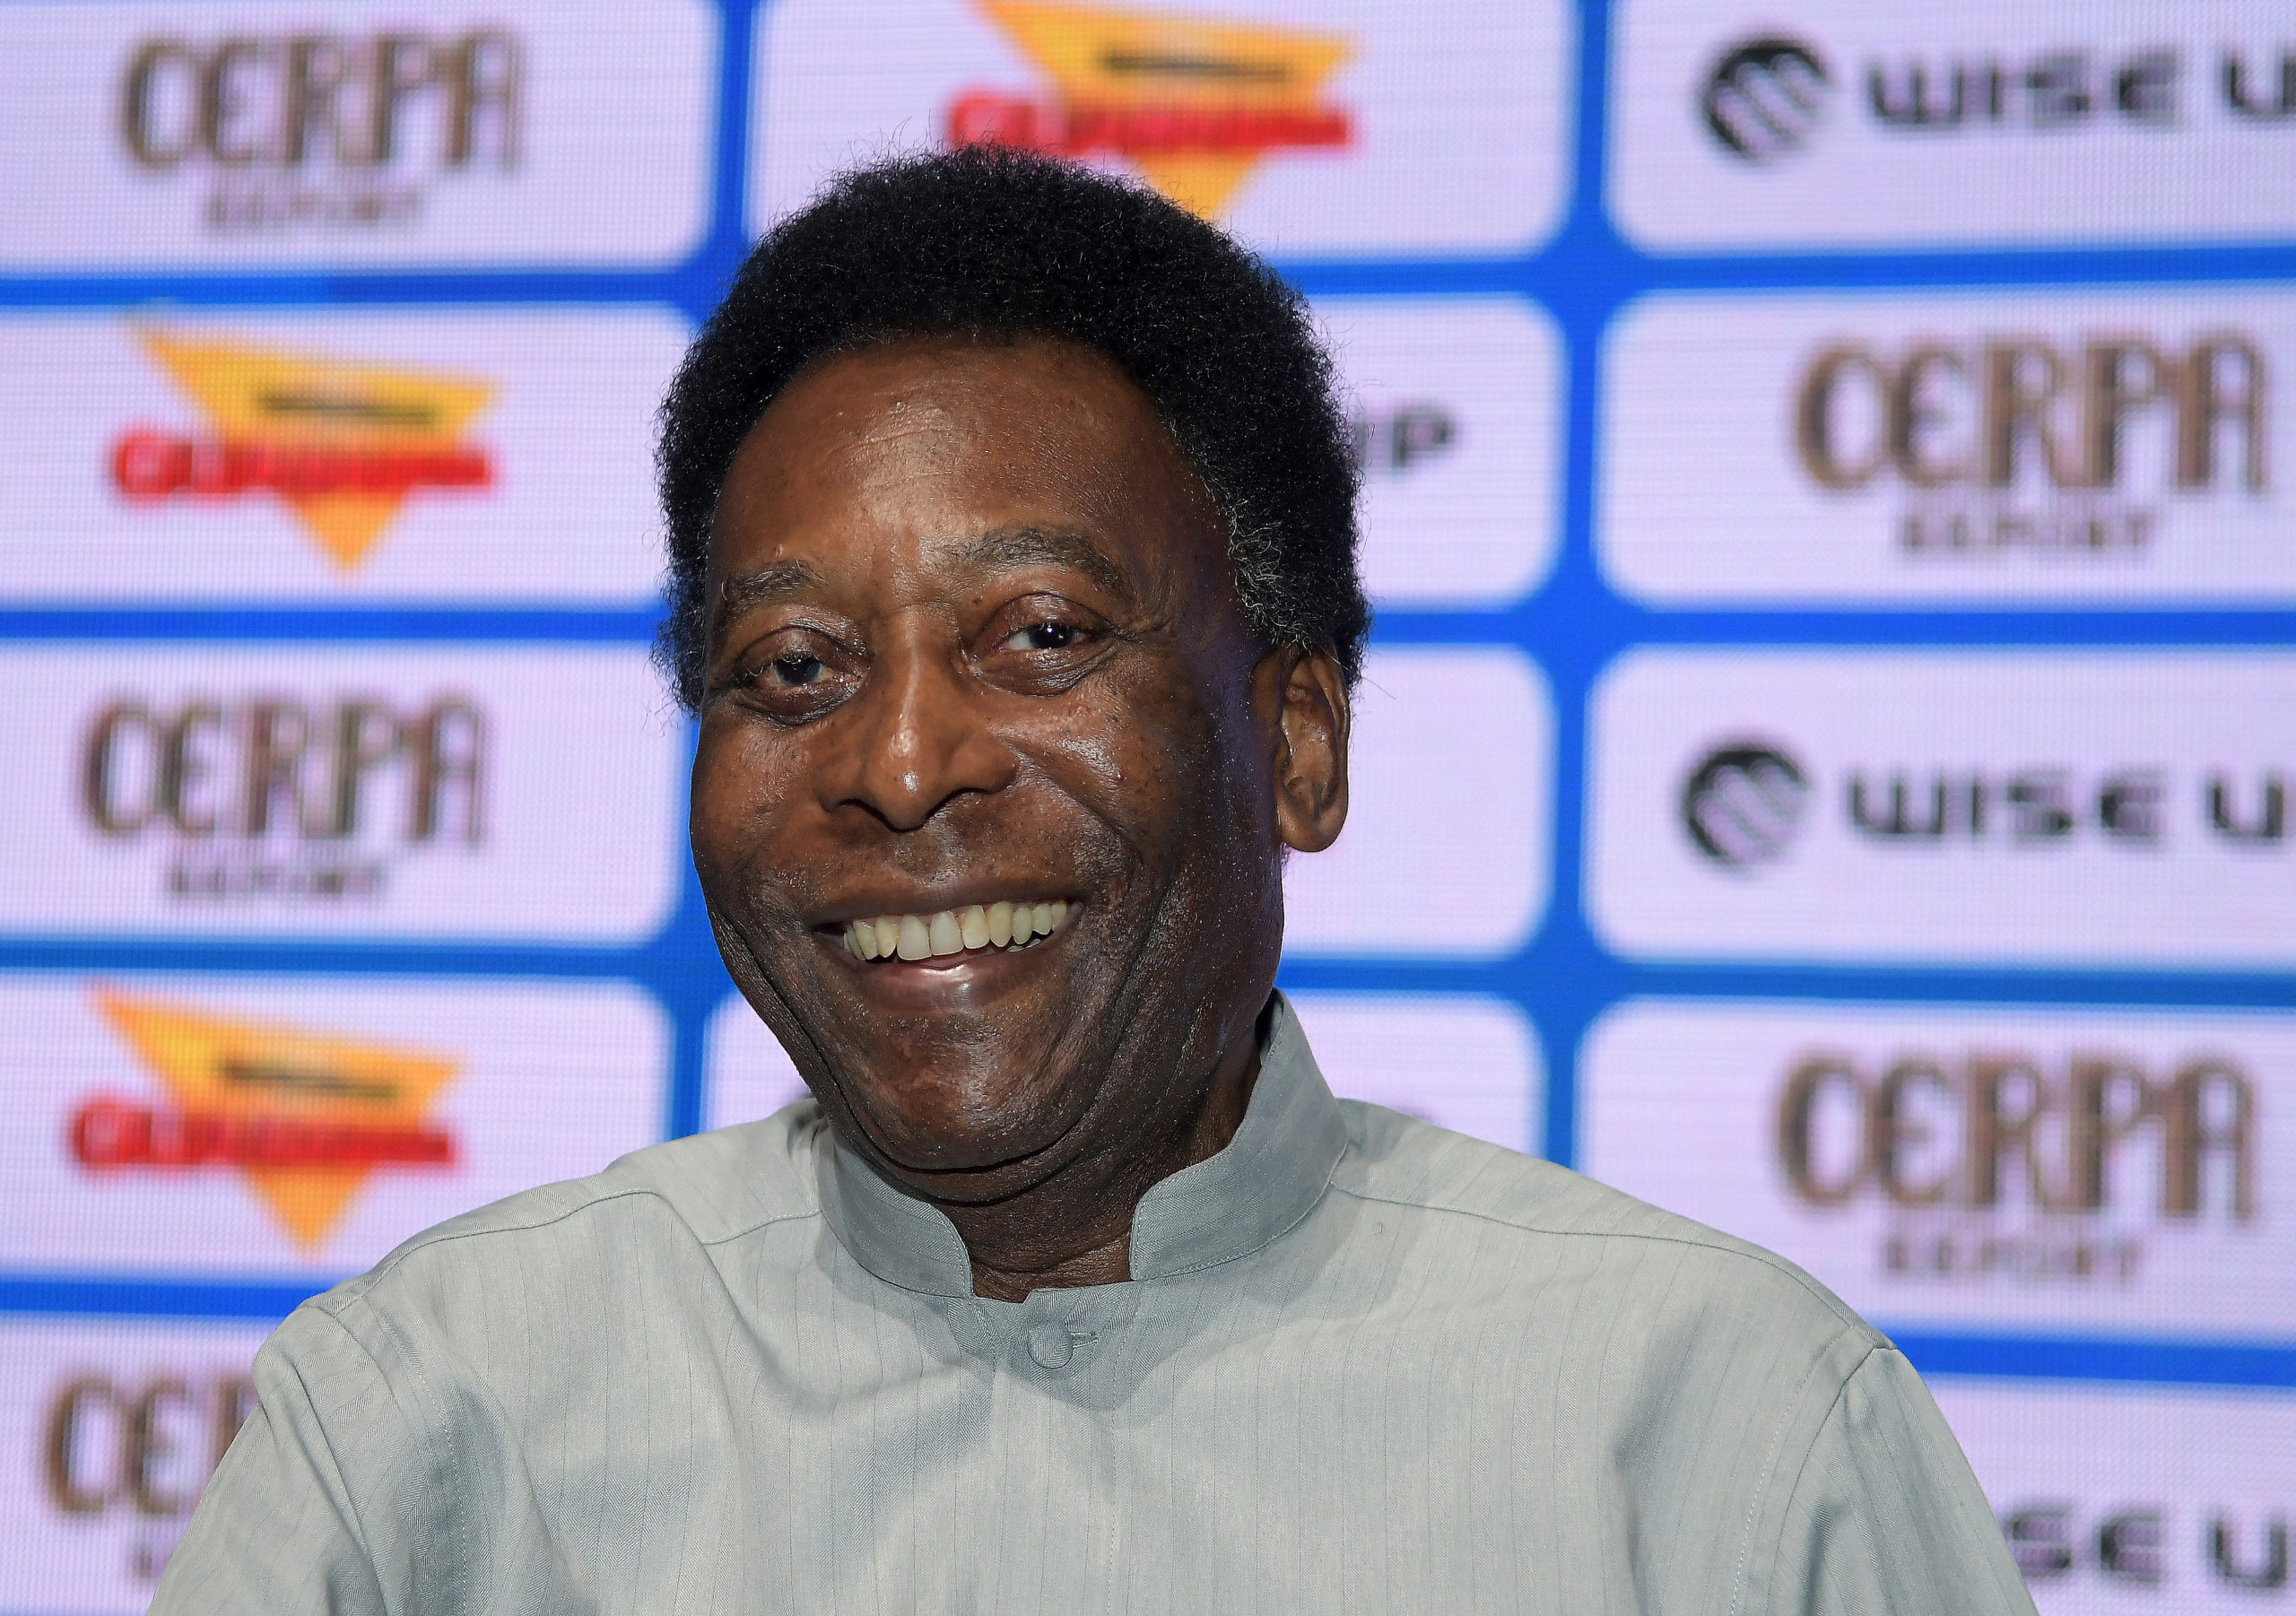 Soccer Legend Pelé, 82, Has Passed Away After Tragic Battle With Cancer